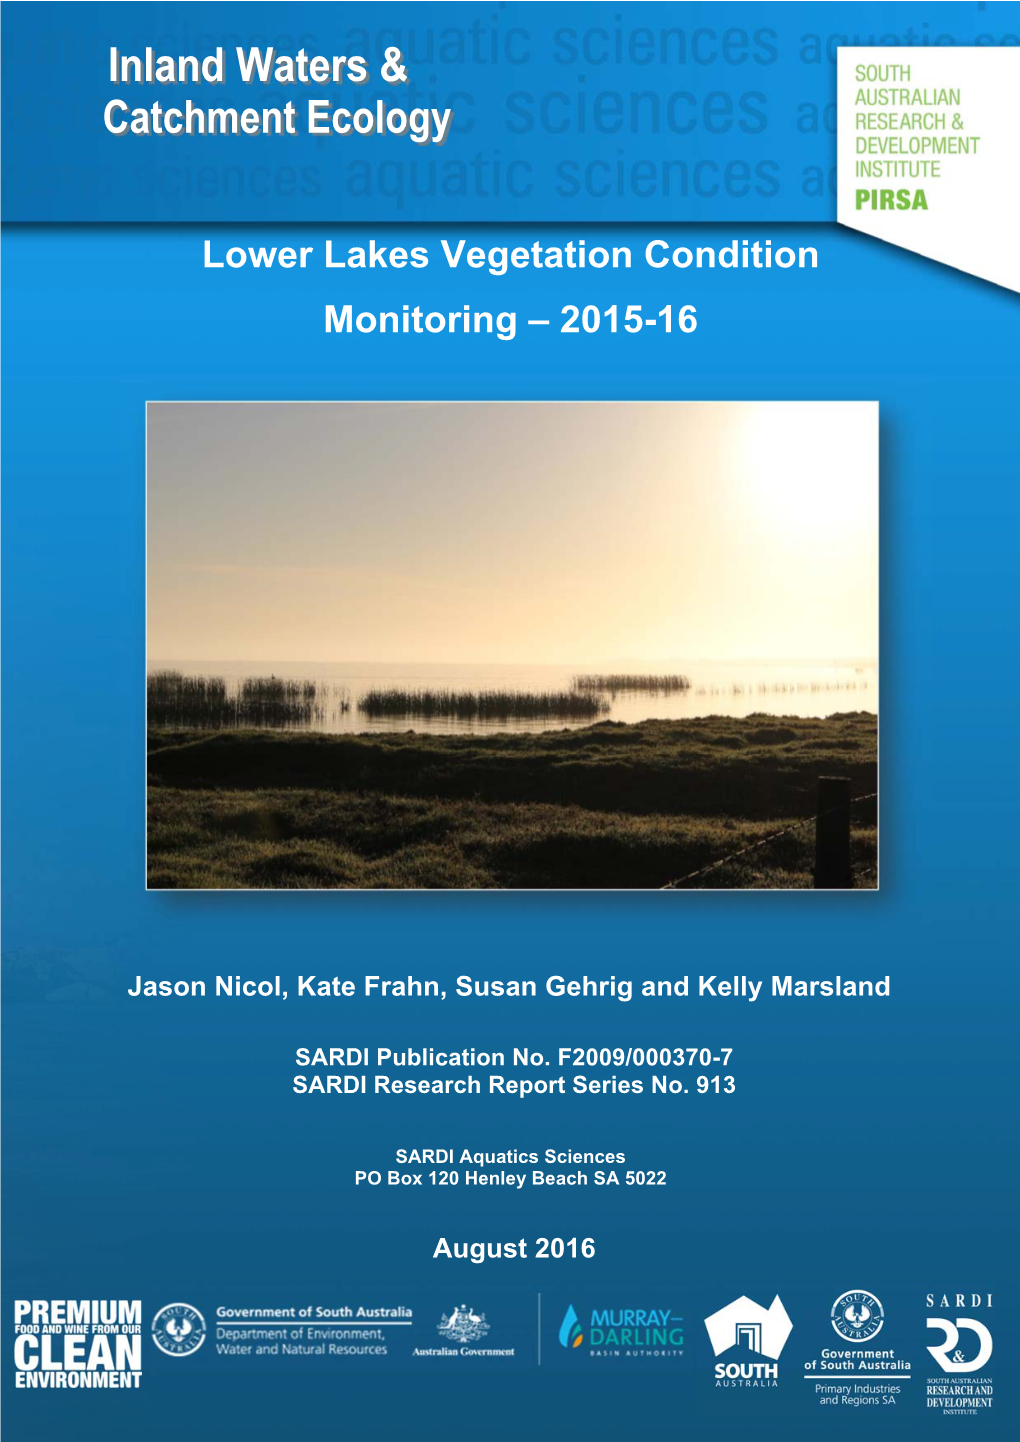 Lower Lakes Vegetation Condition Monitoring – 2015-16